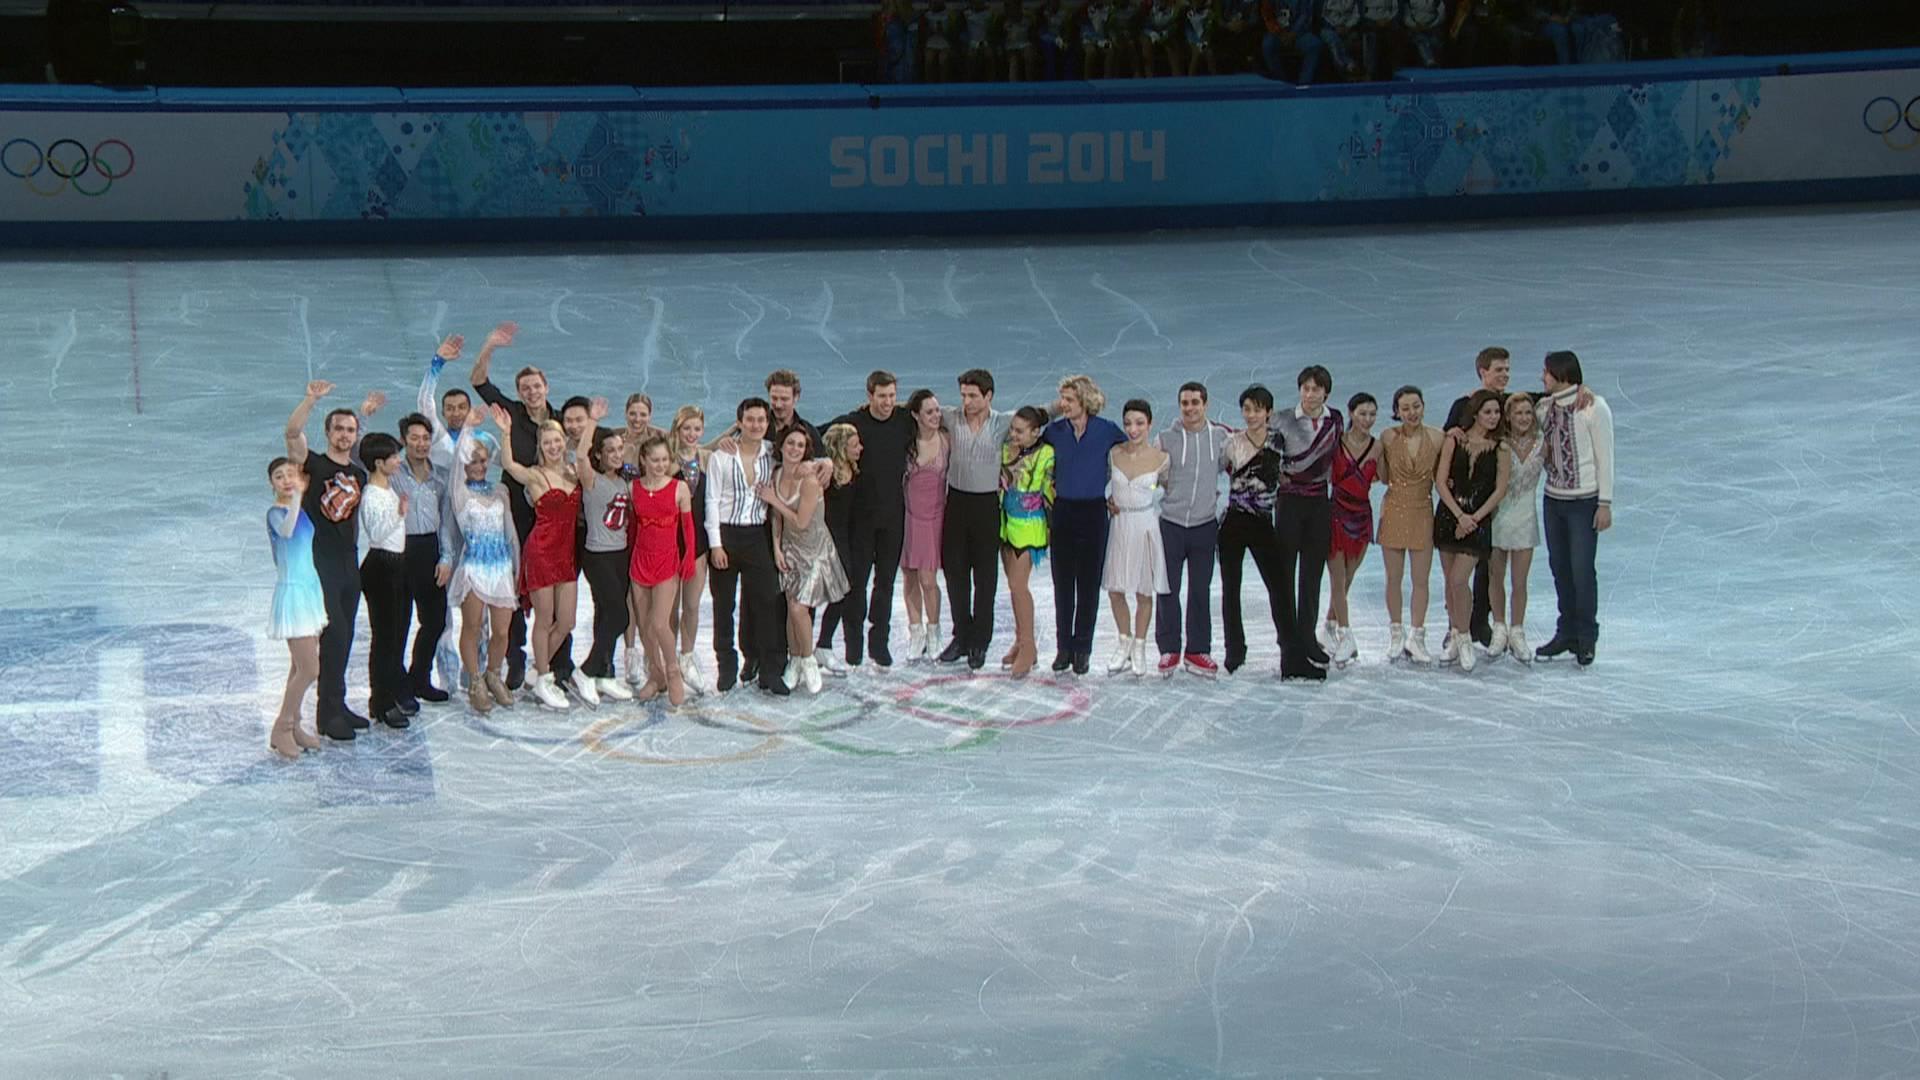 Everything you need to know about the Olympic figure skating exhibition gala at Beijing 2022